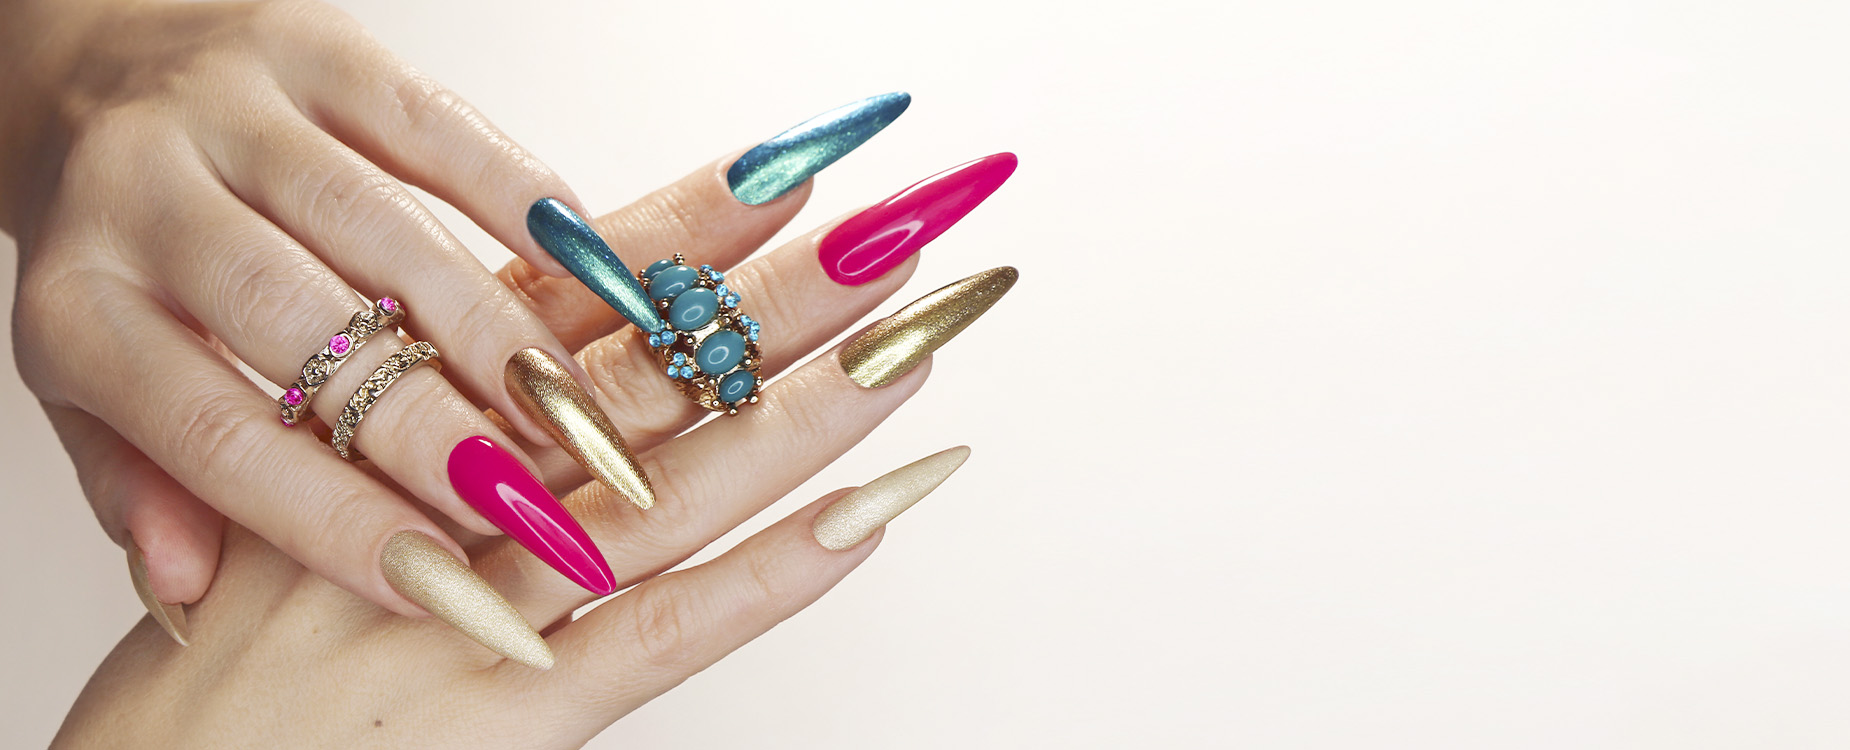 Get te spotlight on your fingertips with our dazzing accessories